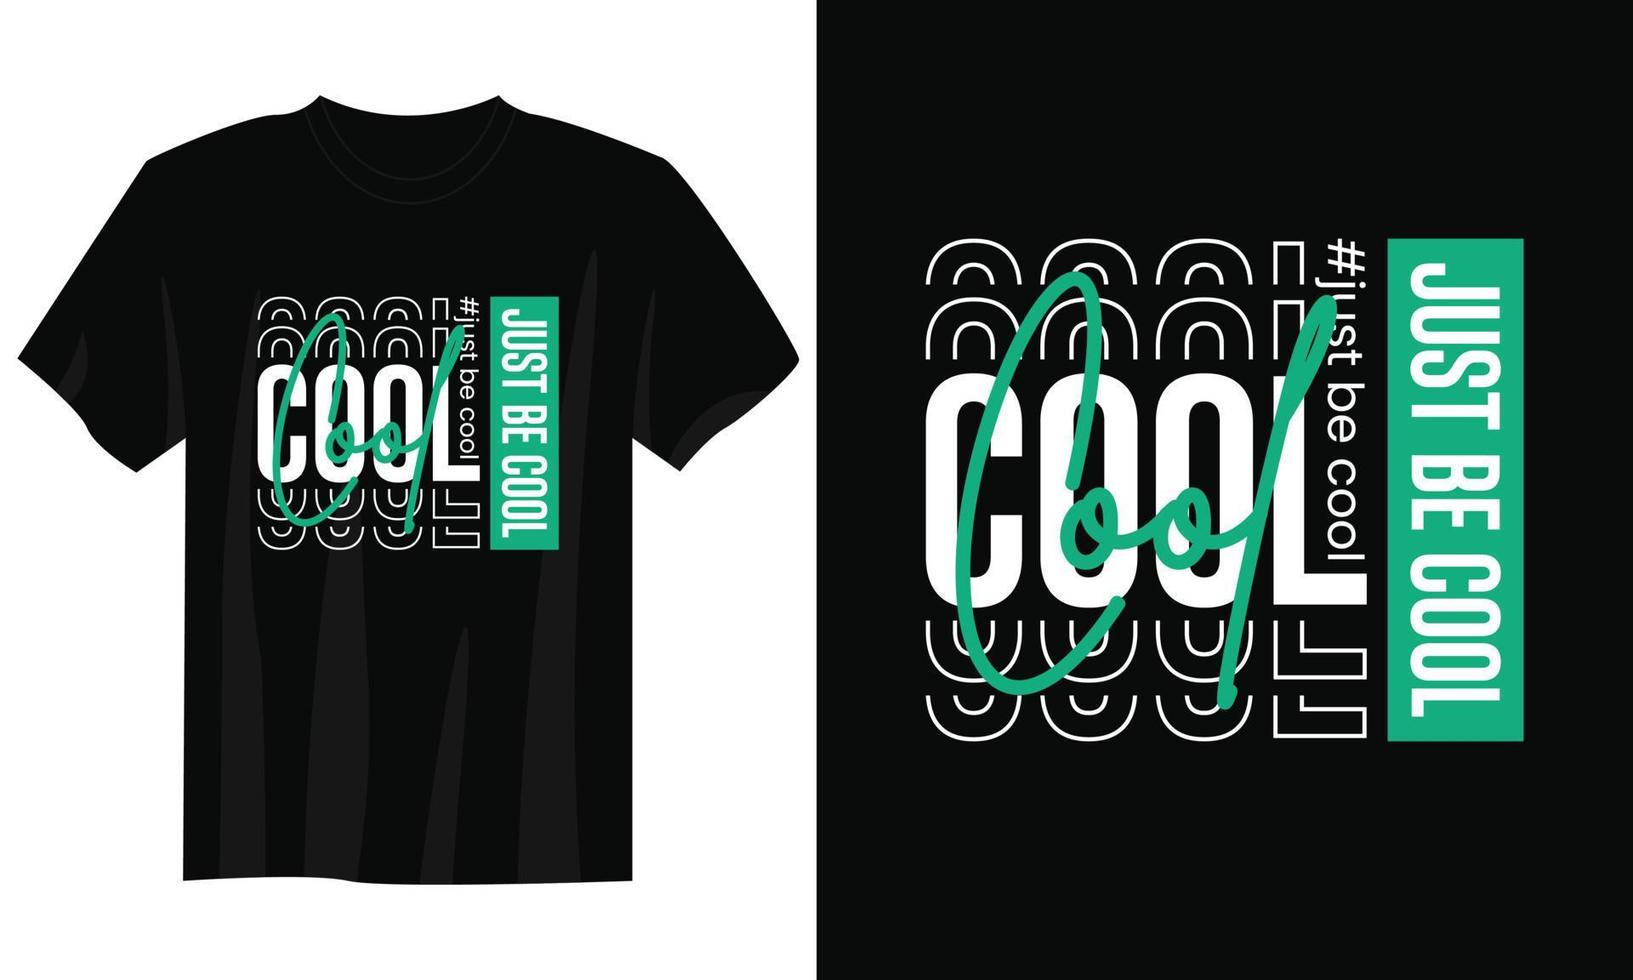 just be cool typography t shirt design, motivational typography t shirt design, inspirational quotes t-shirt design, streetwear t shirt design vector